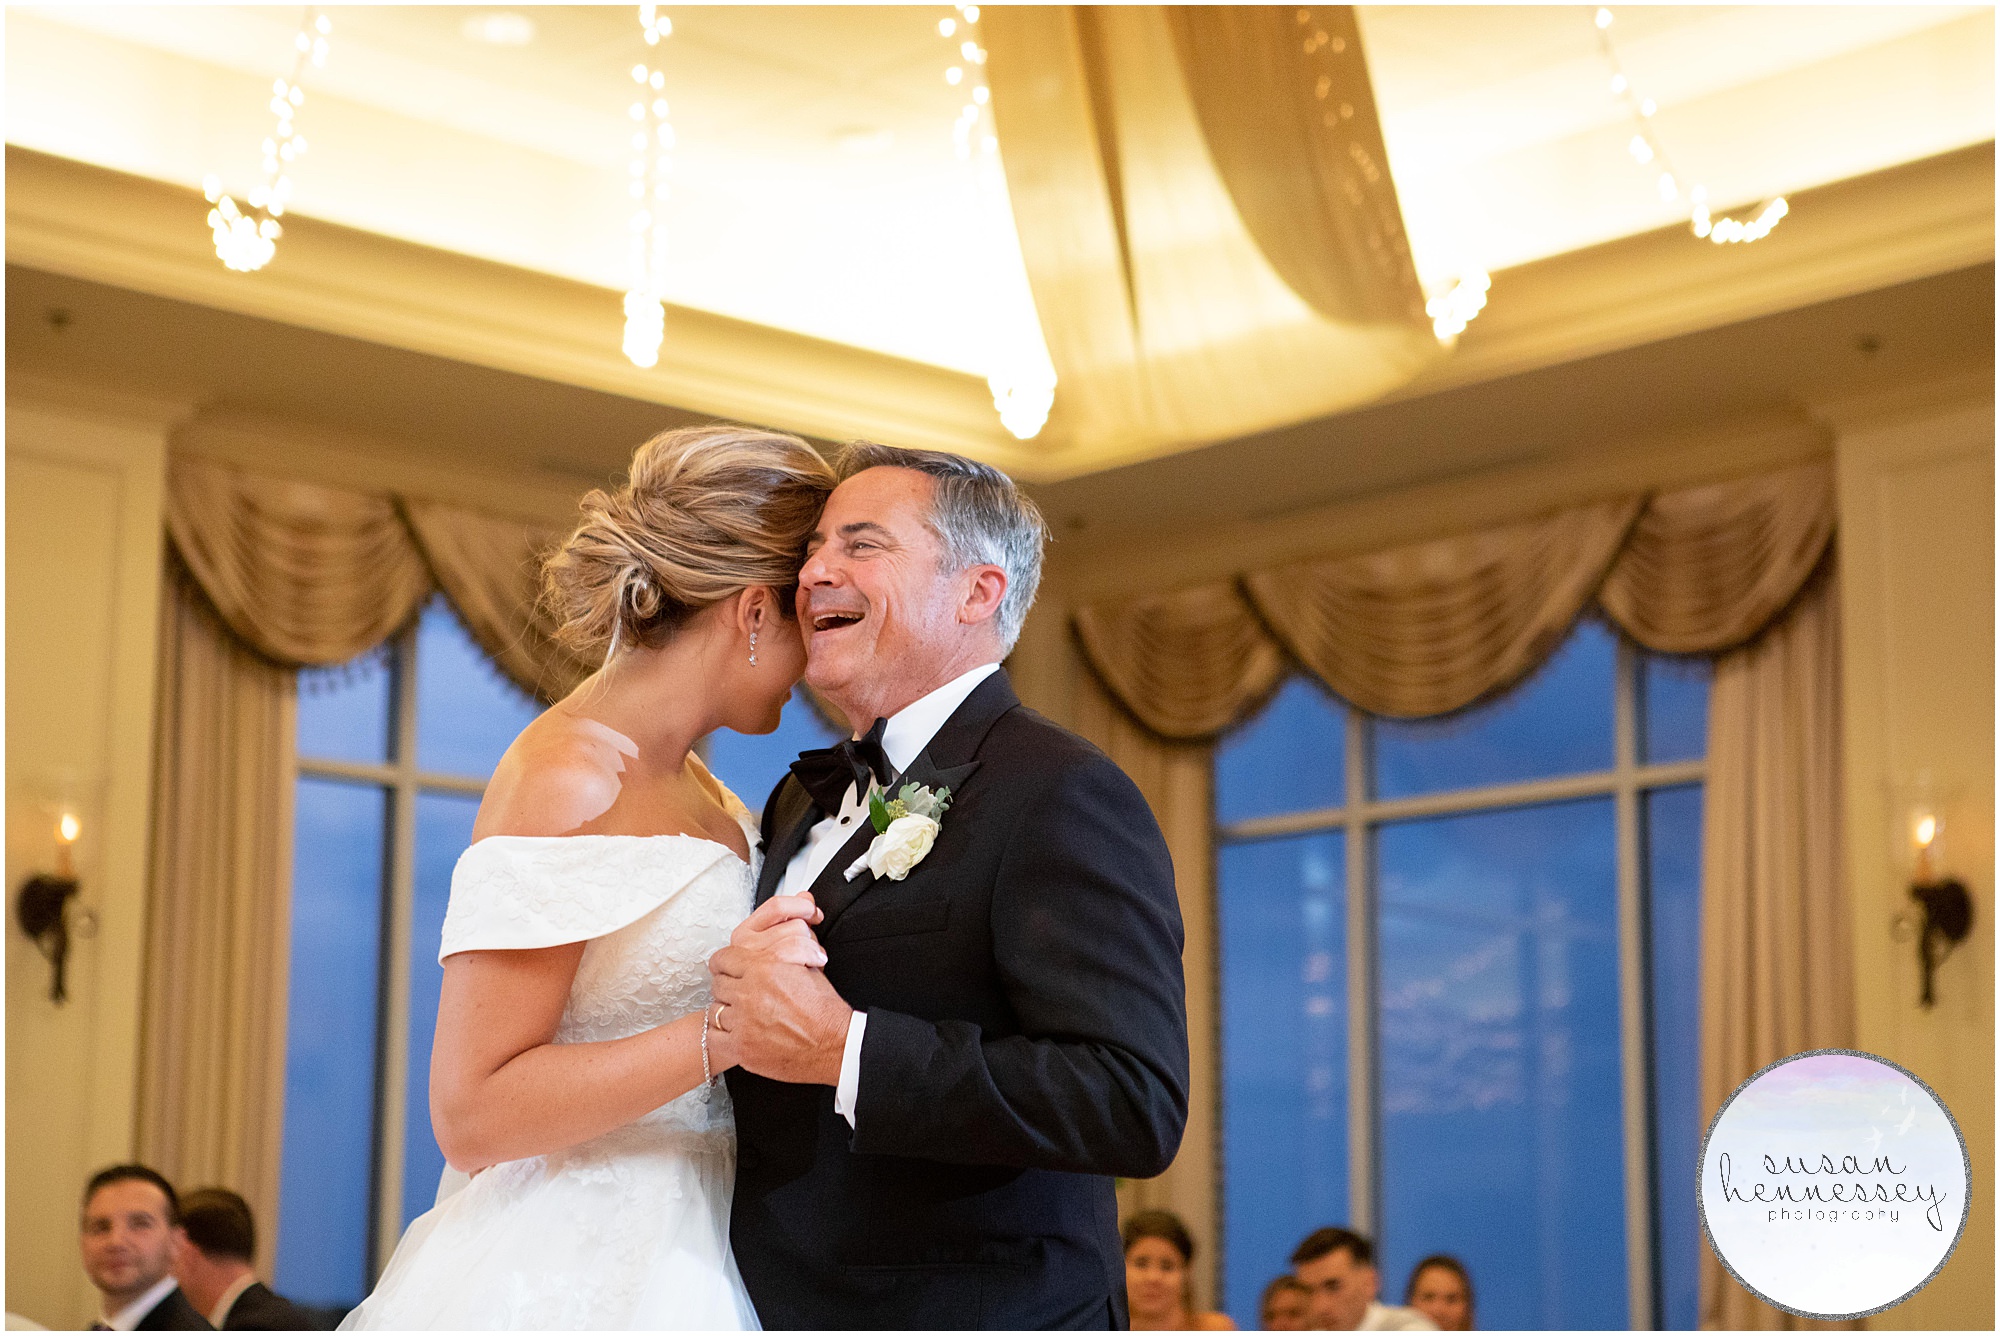 Father and daughter dance at wedding reception